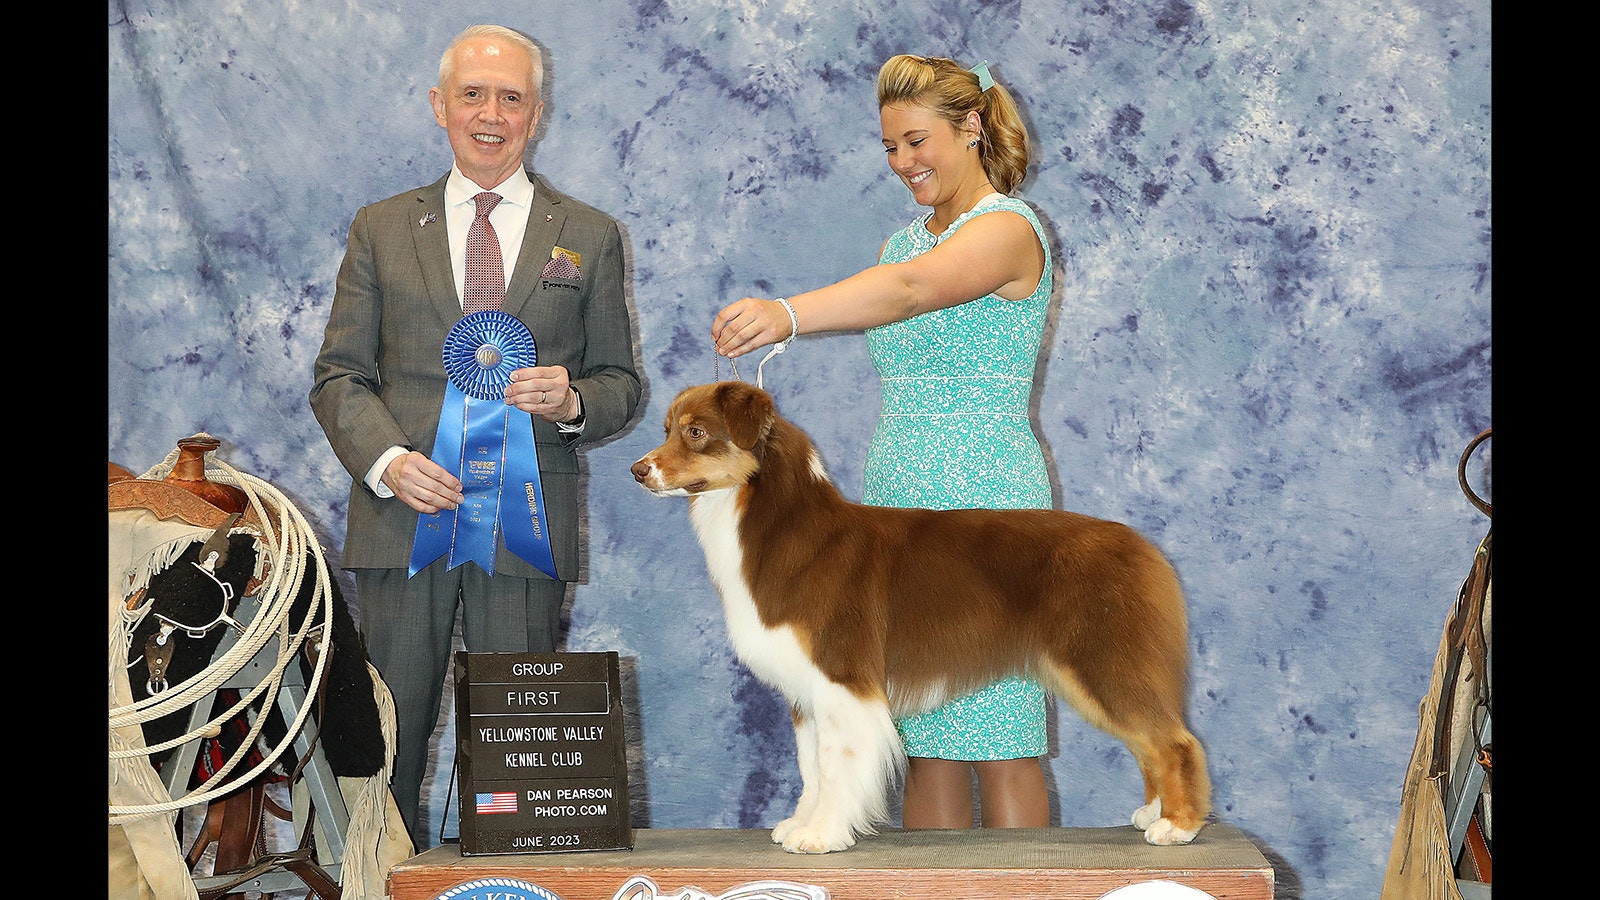 Shelby Shank said her 6-year-old dog will go into semi-retirement next year after a long string of dog show successes.